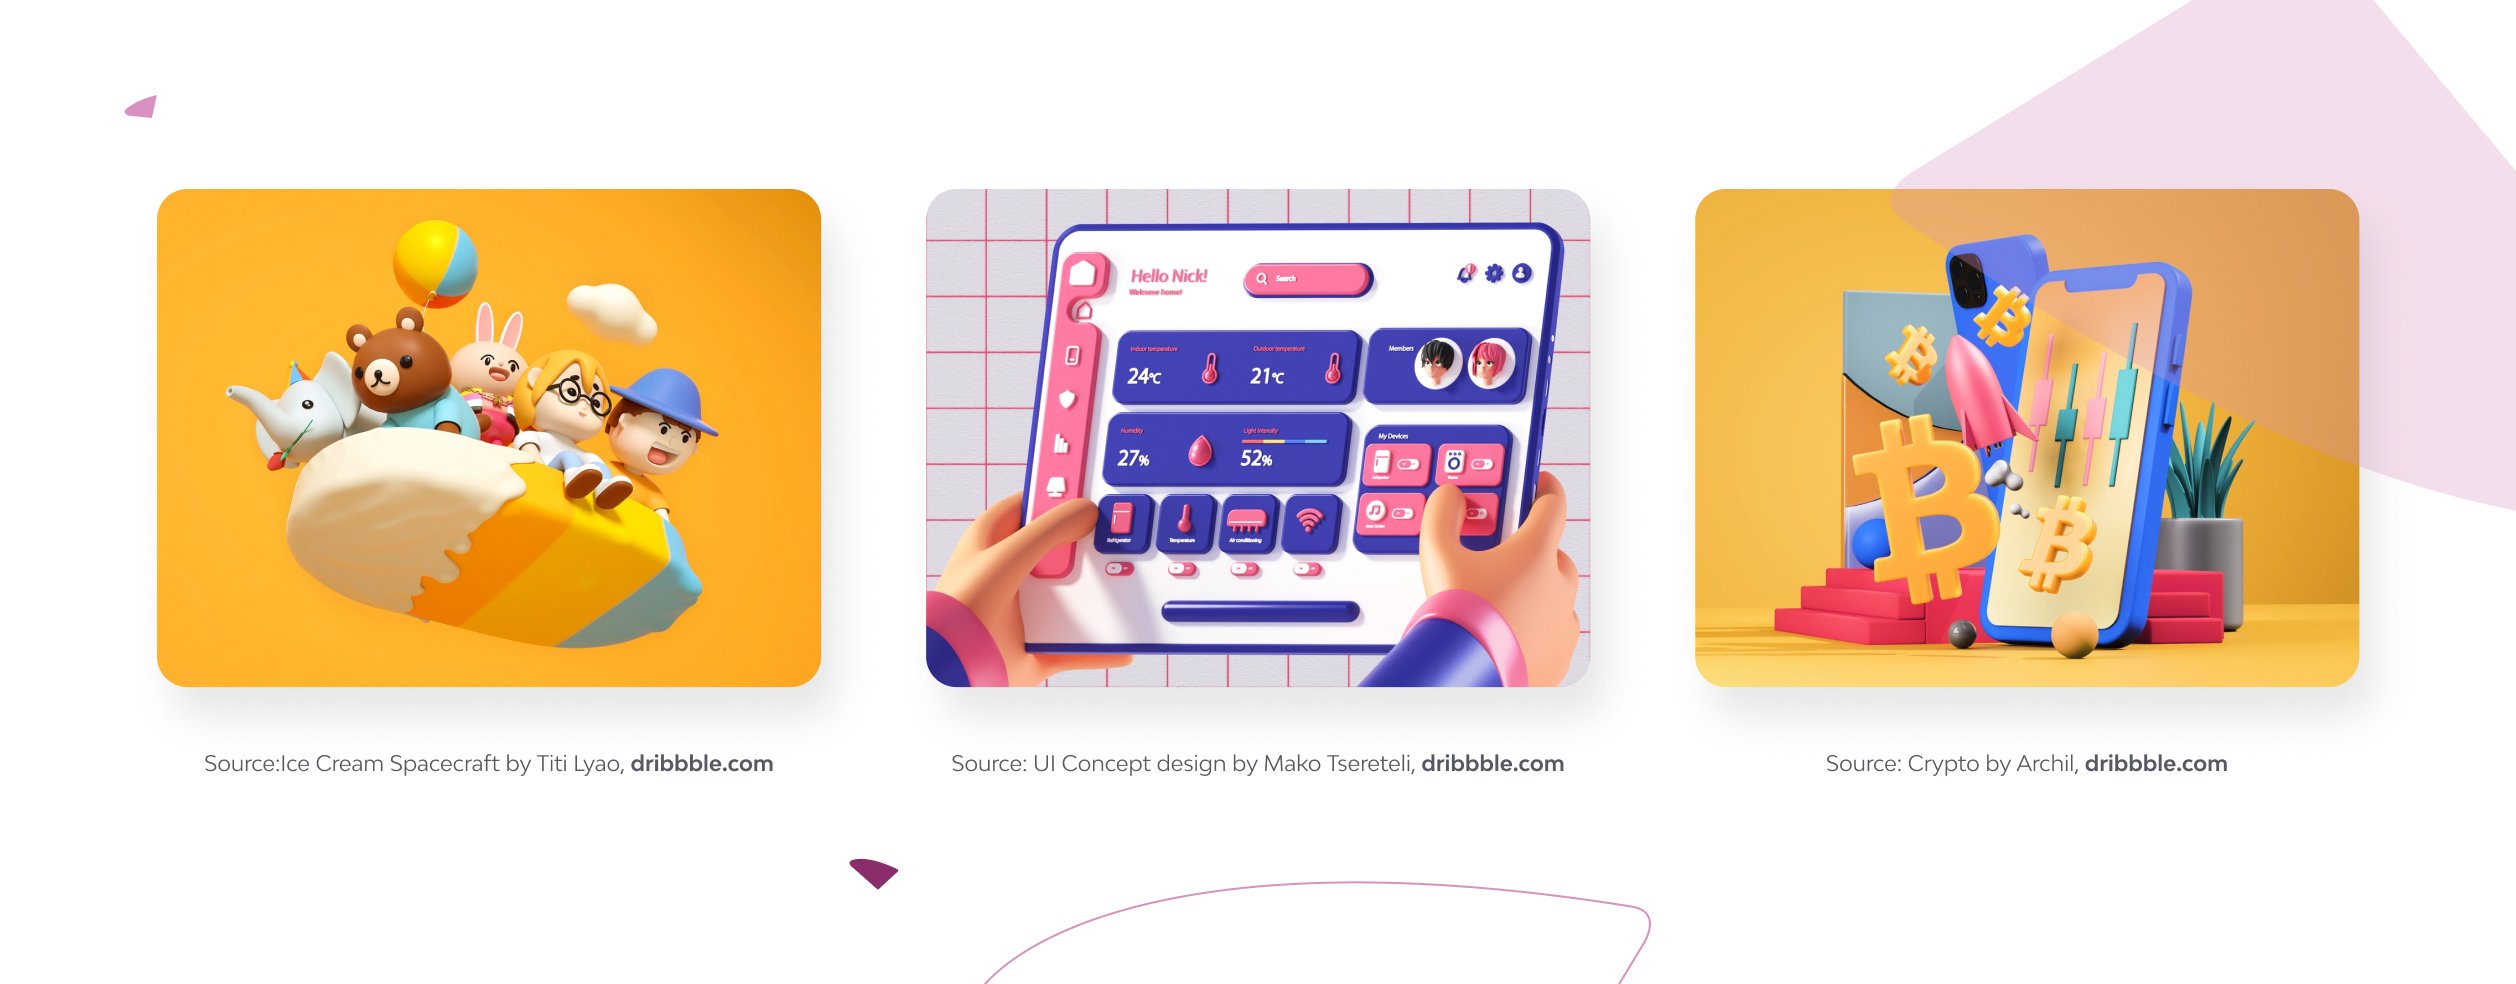 Upcoming UI/UX Trends in Post-Covid Design 8